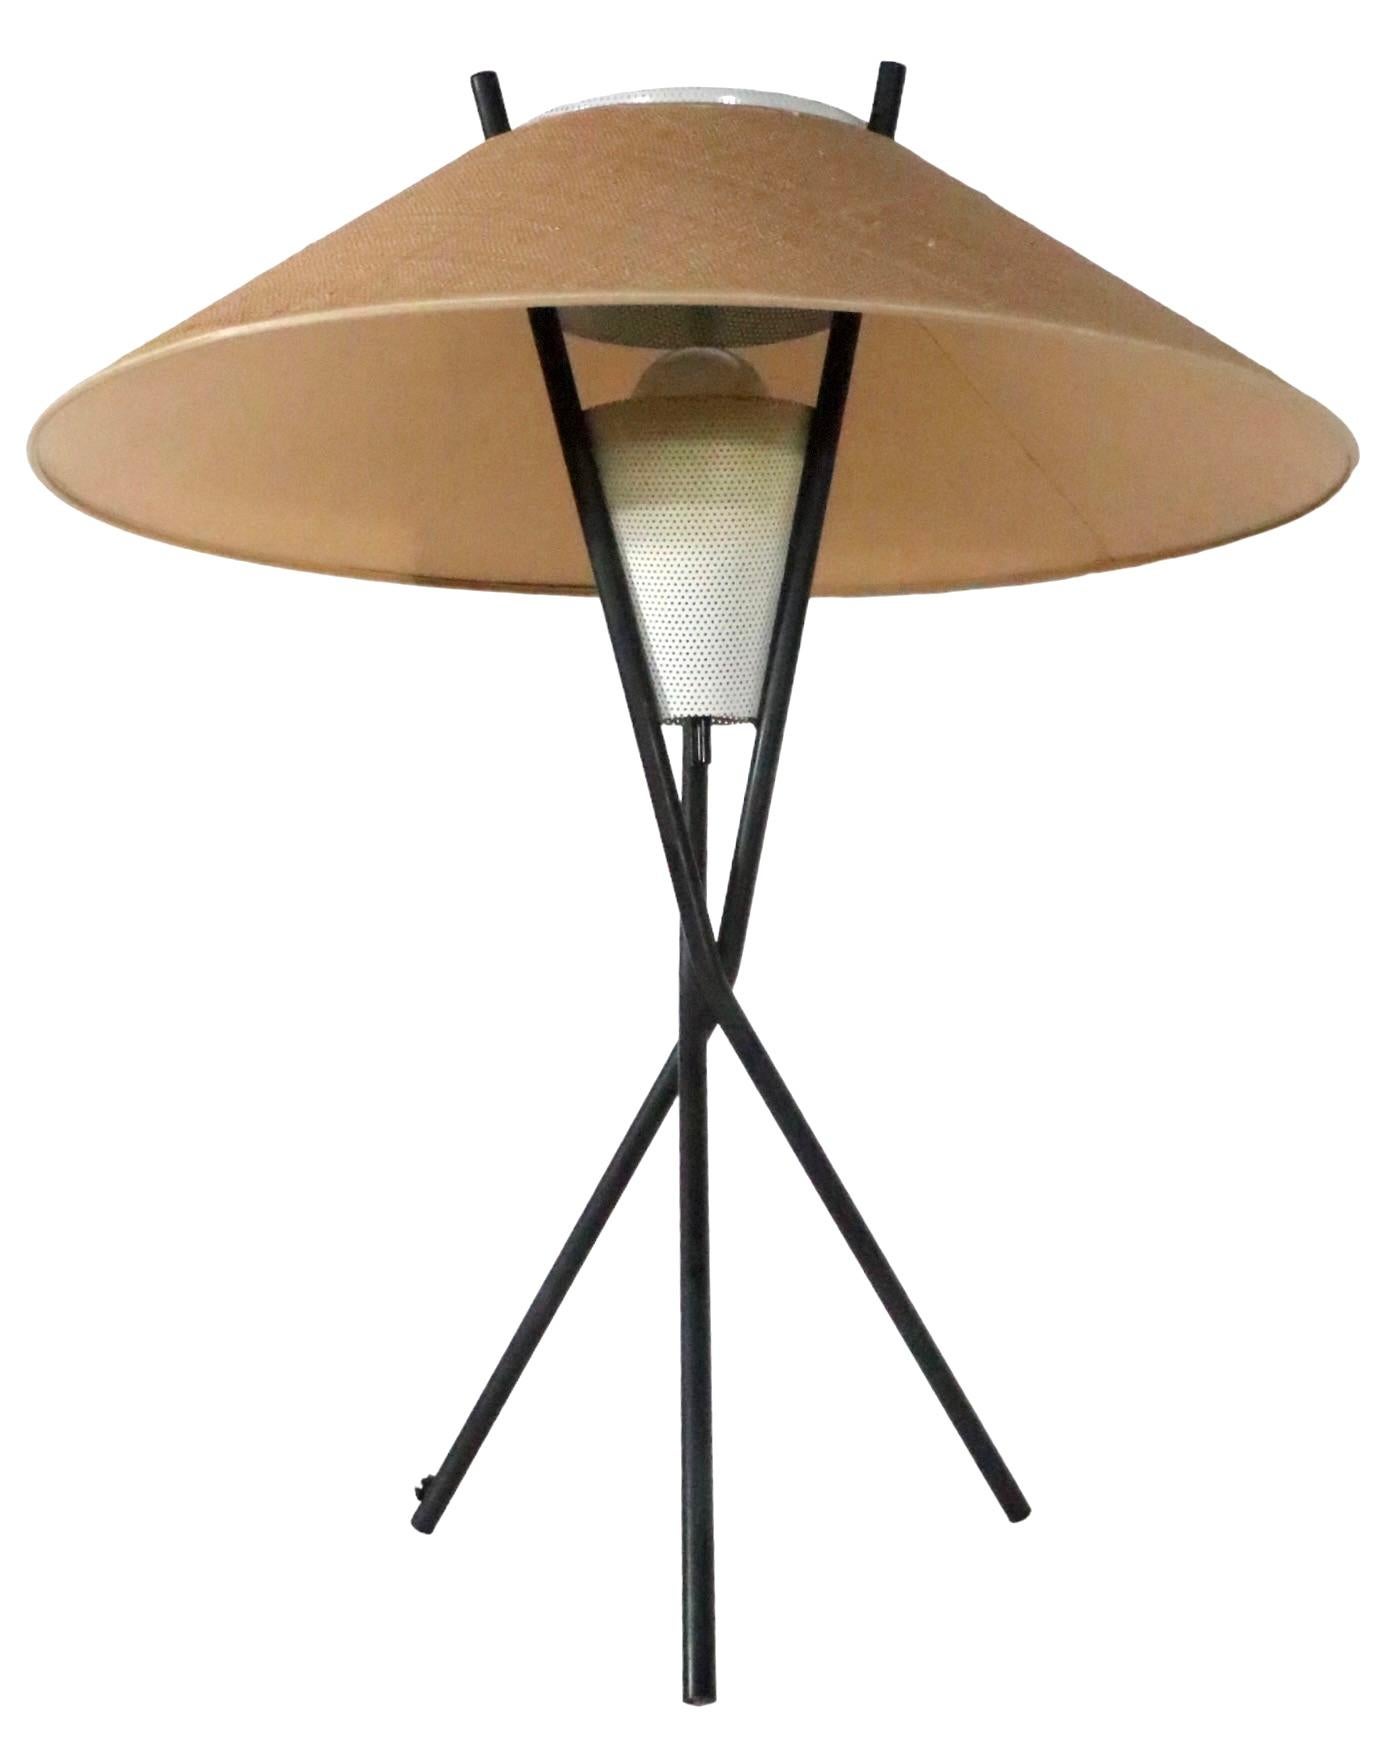 20th Century Midcentury Tri Pod Table Lamp by Gerald Thurston for Lightolier C 1950s For Sale